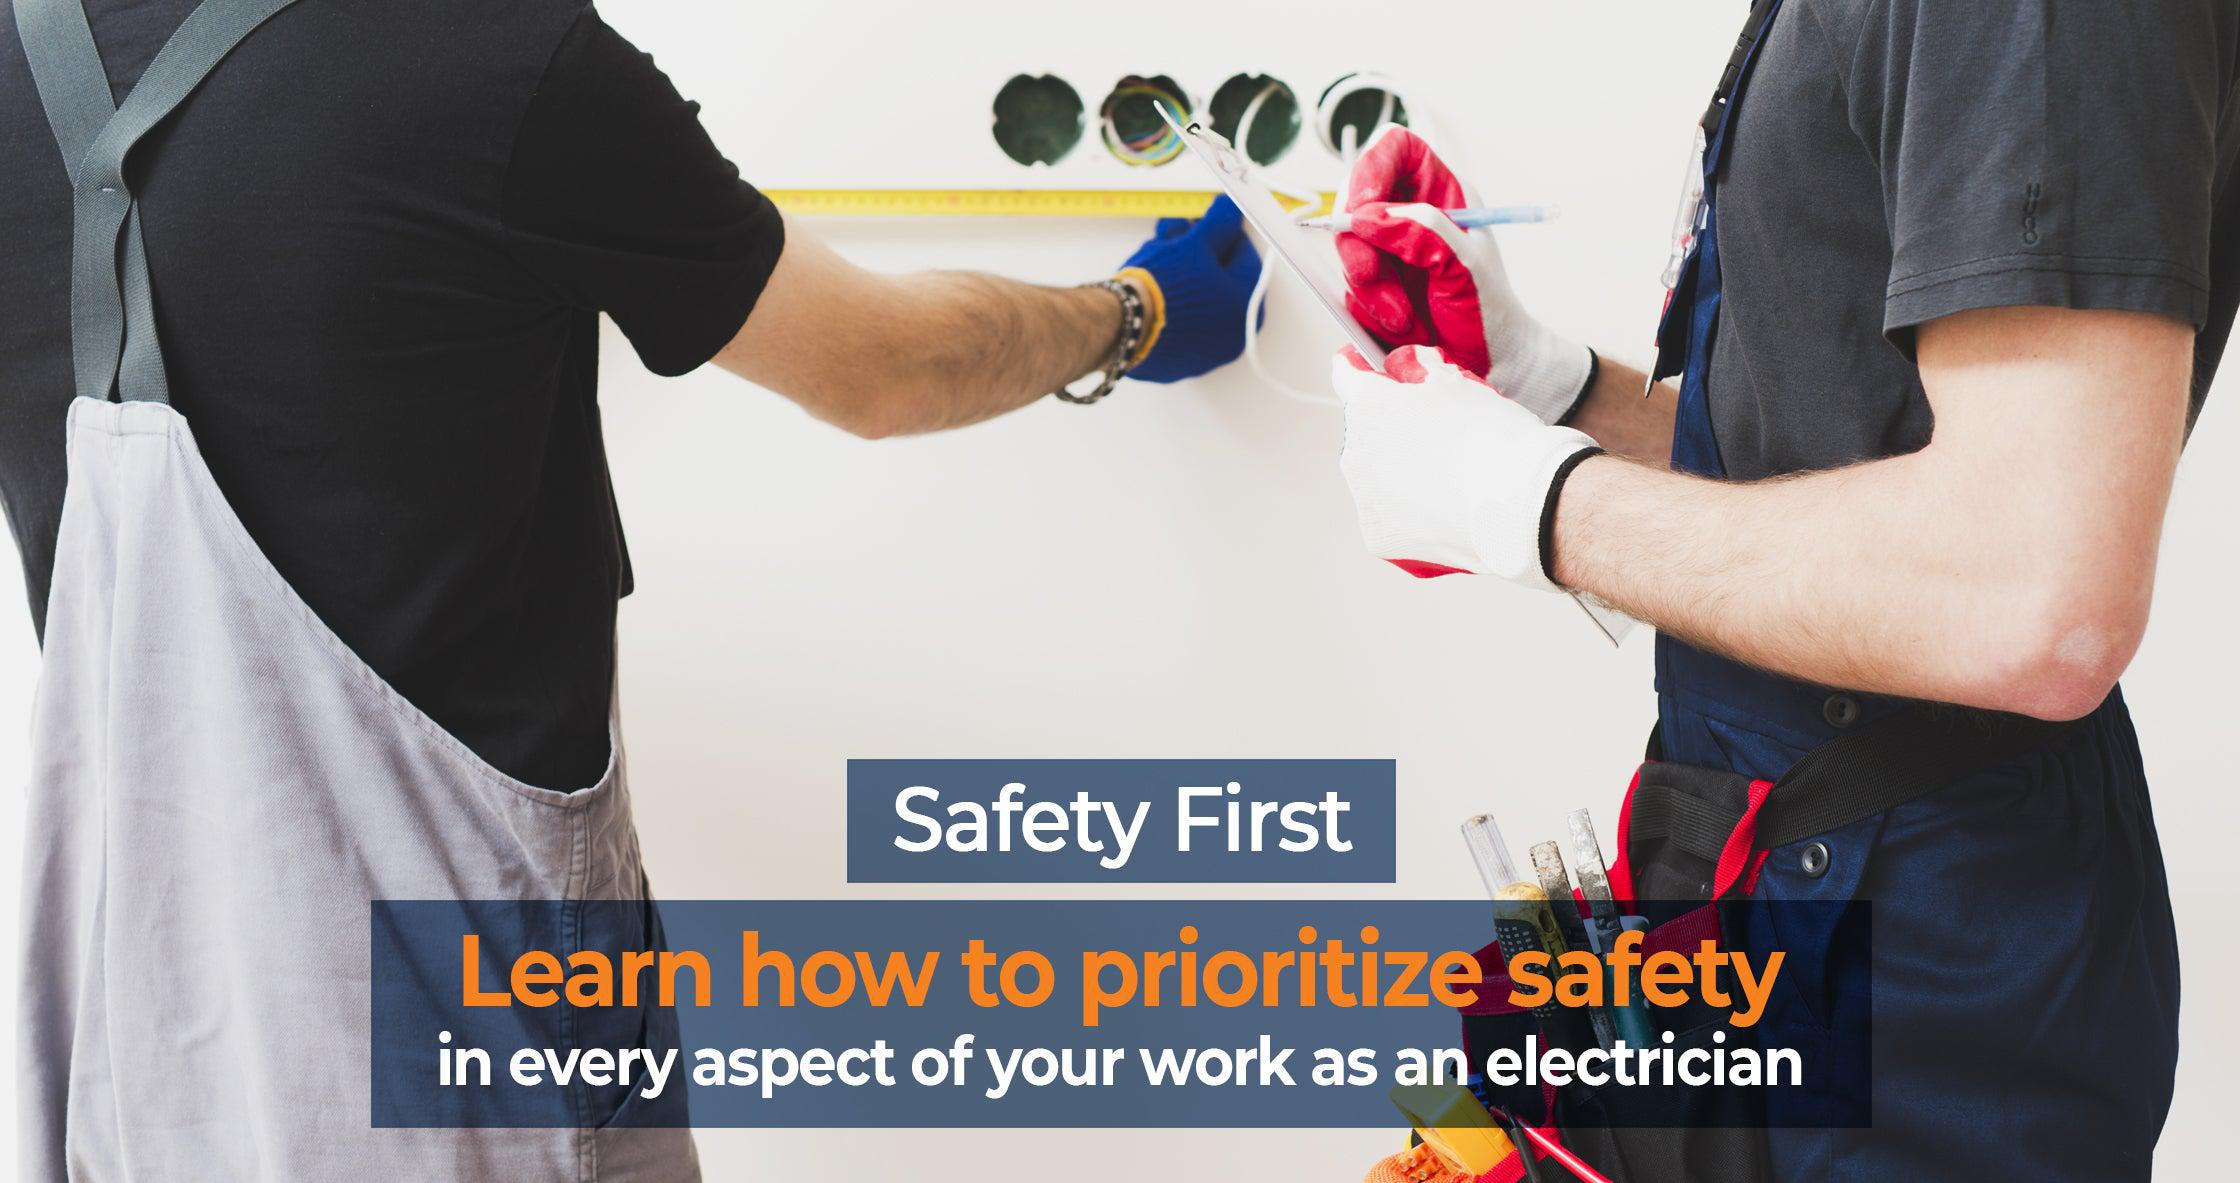 Safety First - Learn how to prioritize safety in every aspect of your work as an electrician.